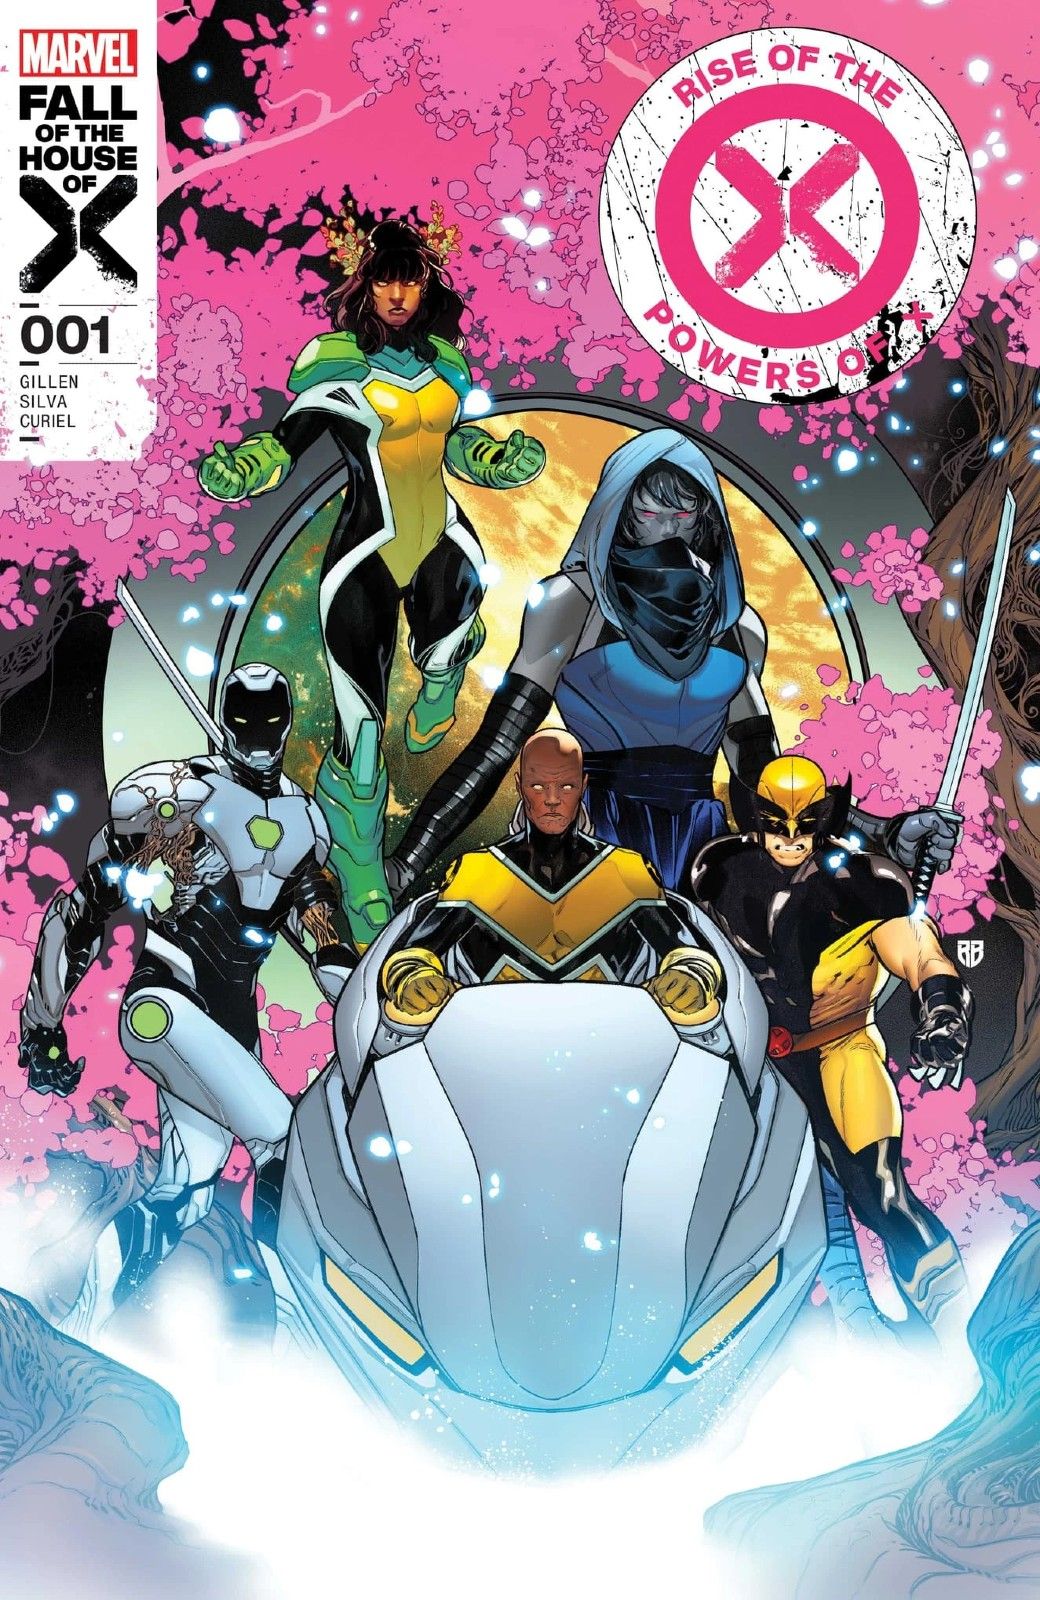 Iron Man and the X-Men emerge from a Krakoan gate in Rise of the Powers of X #1